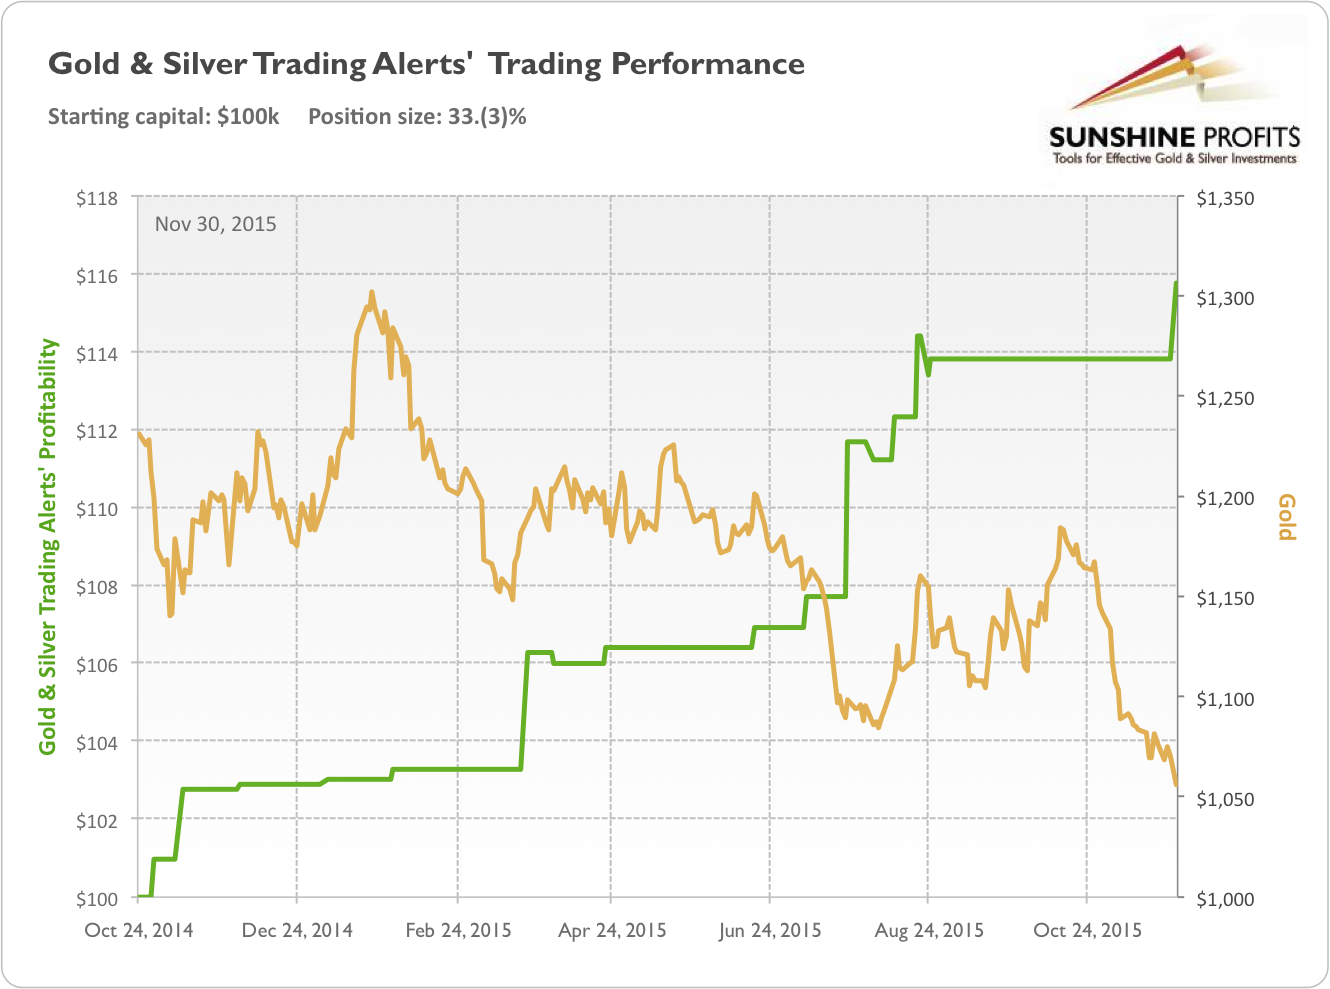 Gold & Silver Trading Alerts' Trading Performance